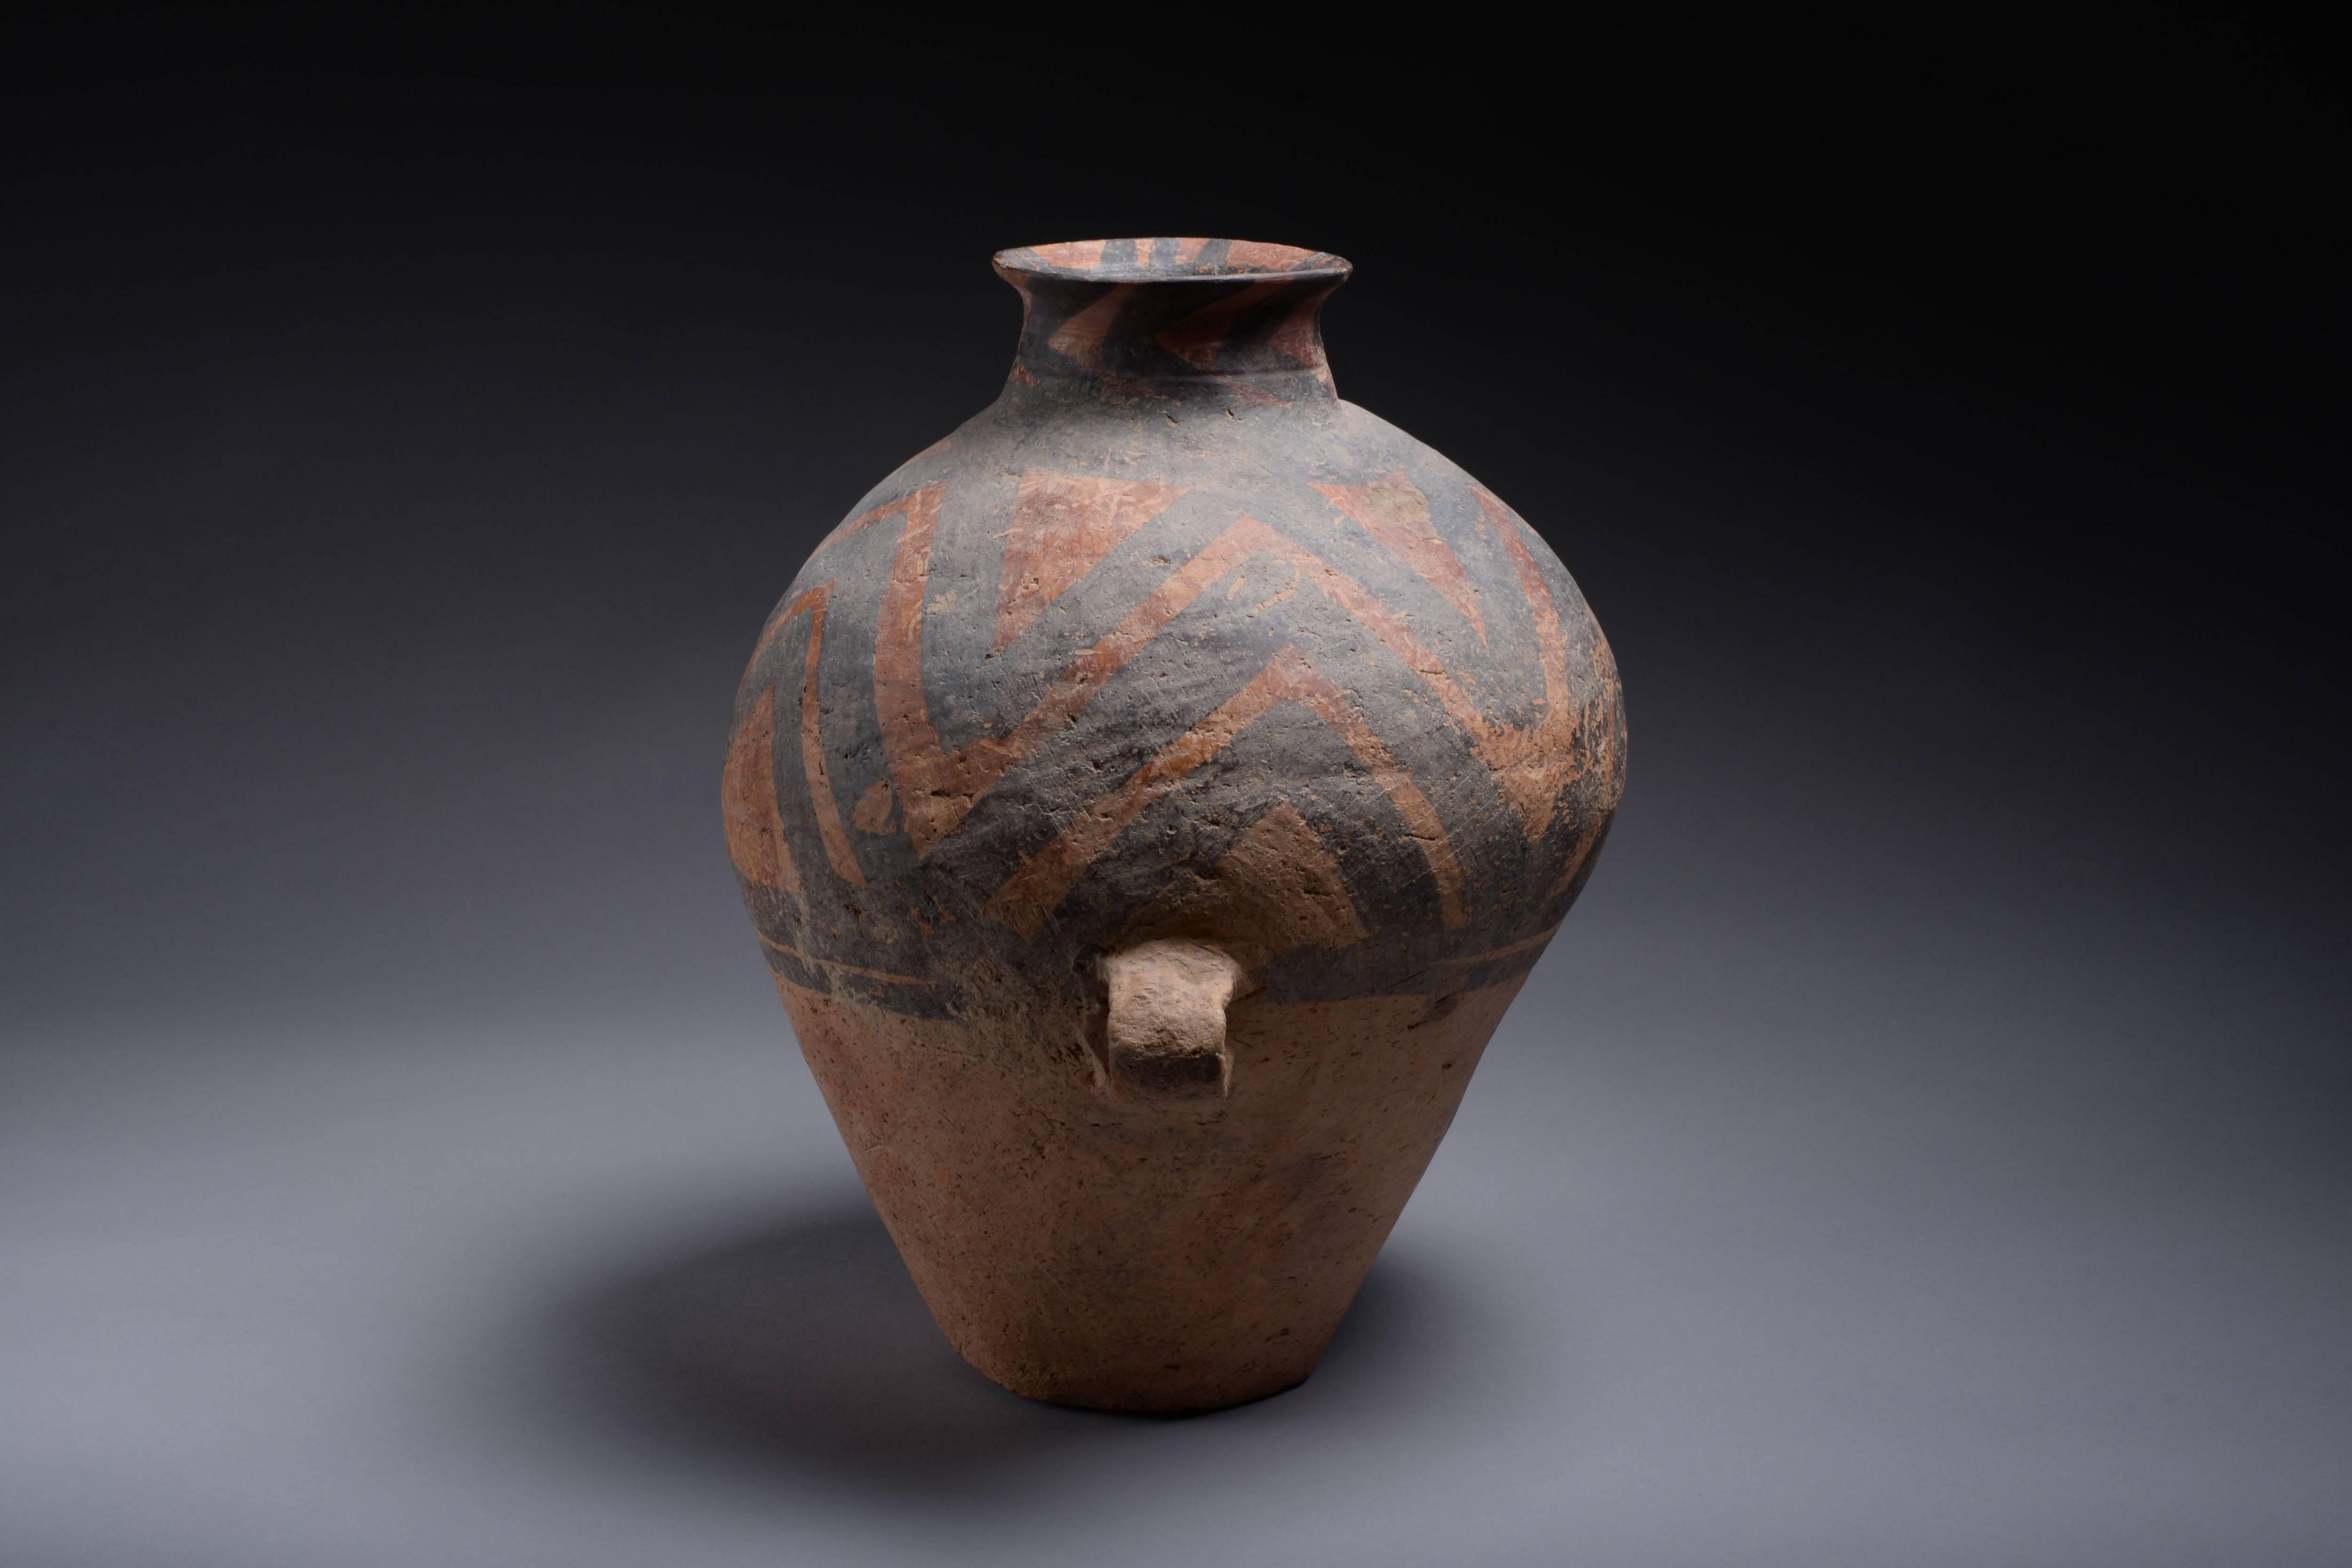 A large ancient Chinese Prehistoric terracotta amphora, dating to circa 3000 BC.
 
This attractive earthenware vase dates to the Majiayao phase of China's Yangshao culture. It is of typical form, with bulbous body, flaring neck and strap handles.